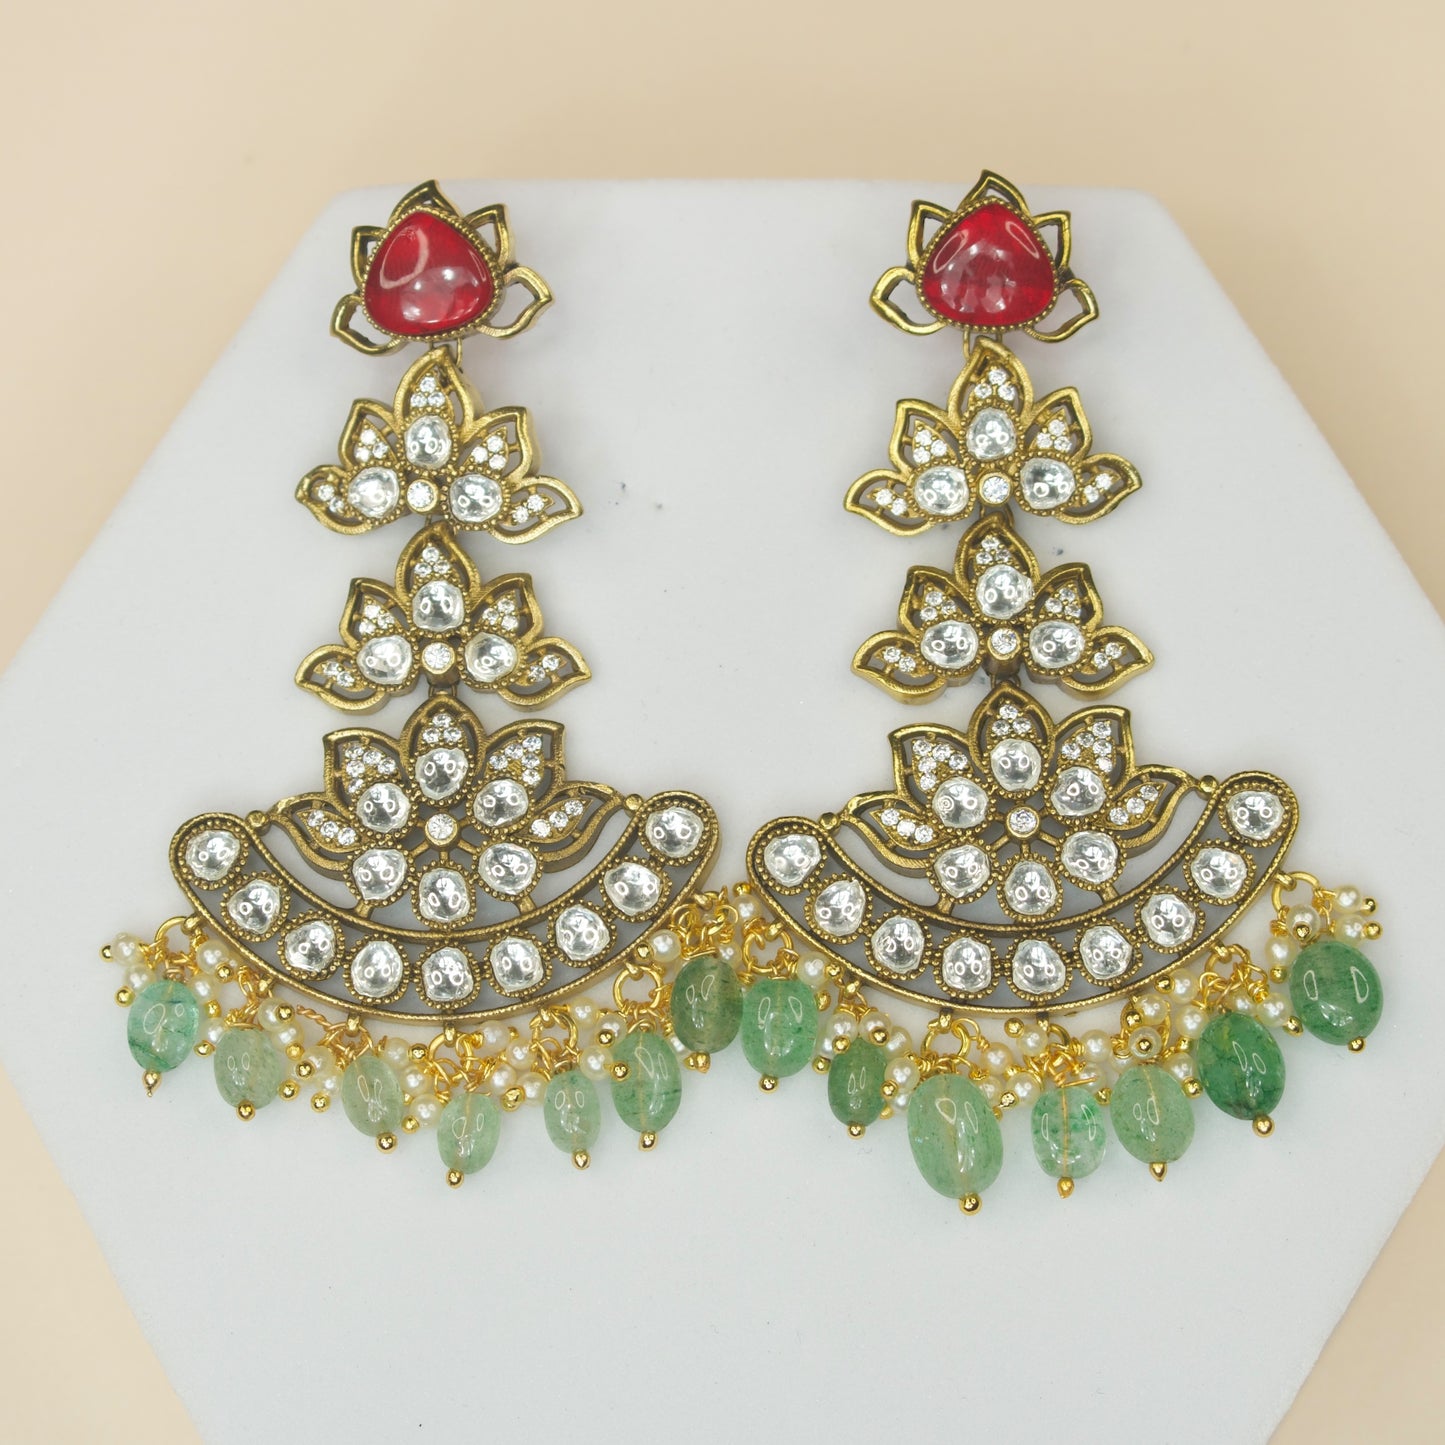 Floral Style Victorian pushback Earrings